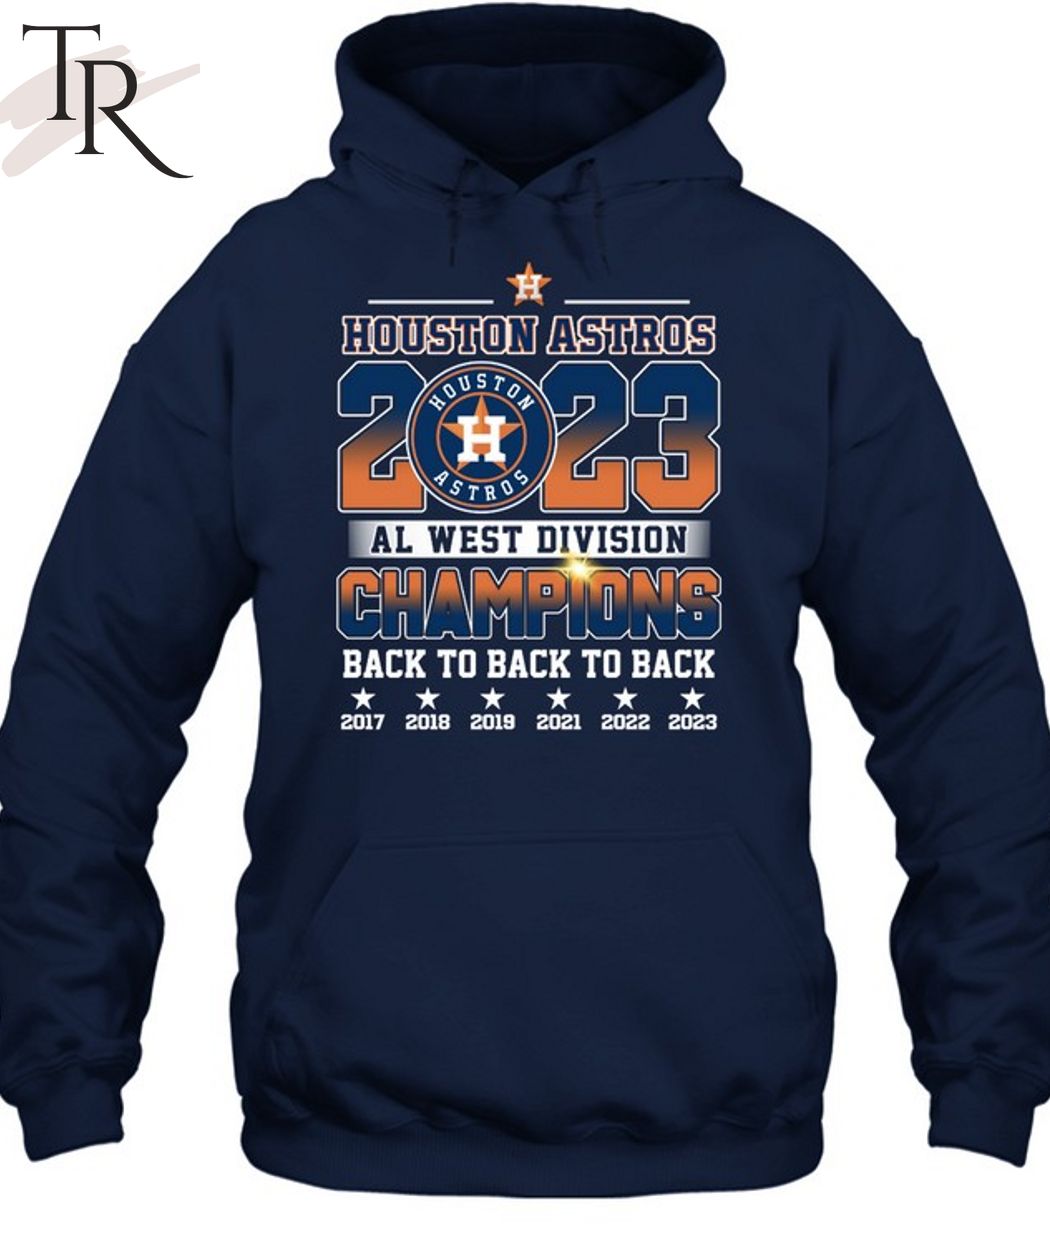 Houston Astros AL West Division Champions Back To Back To Back T